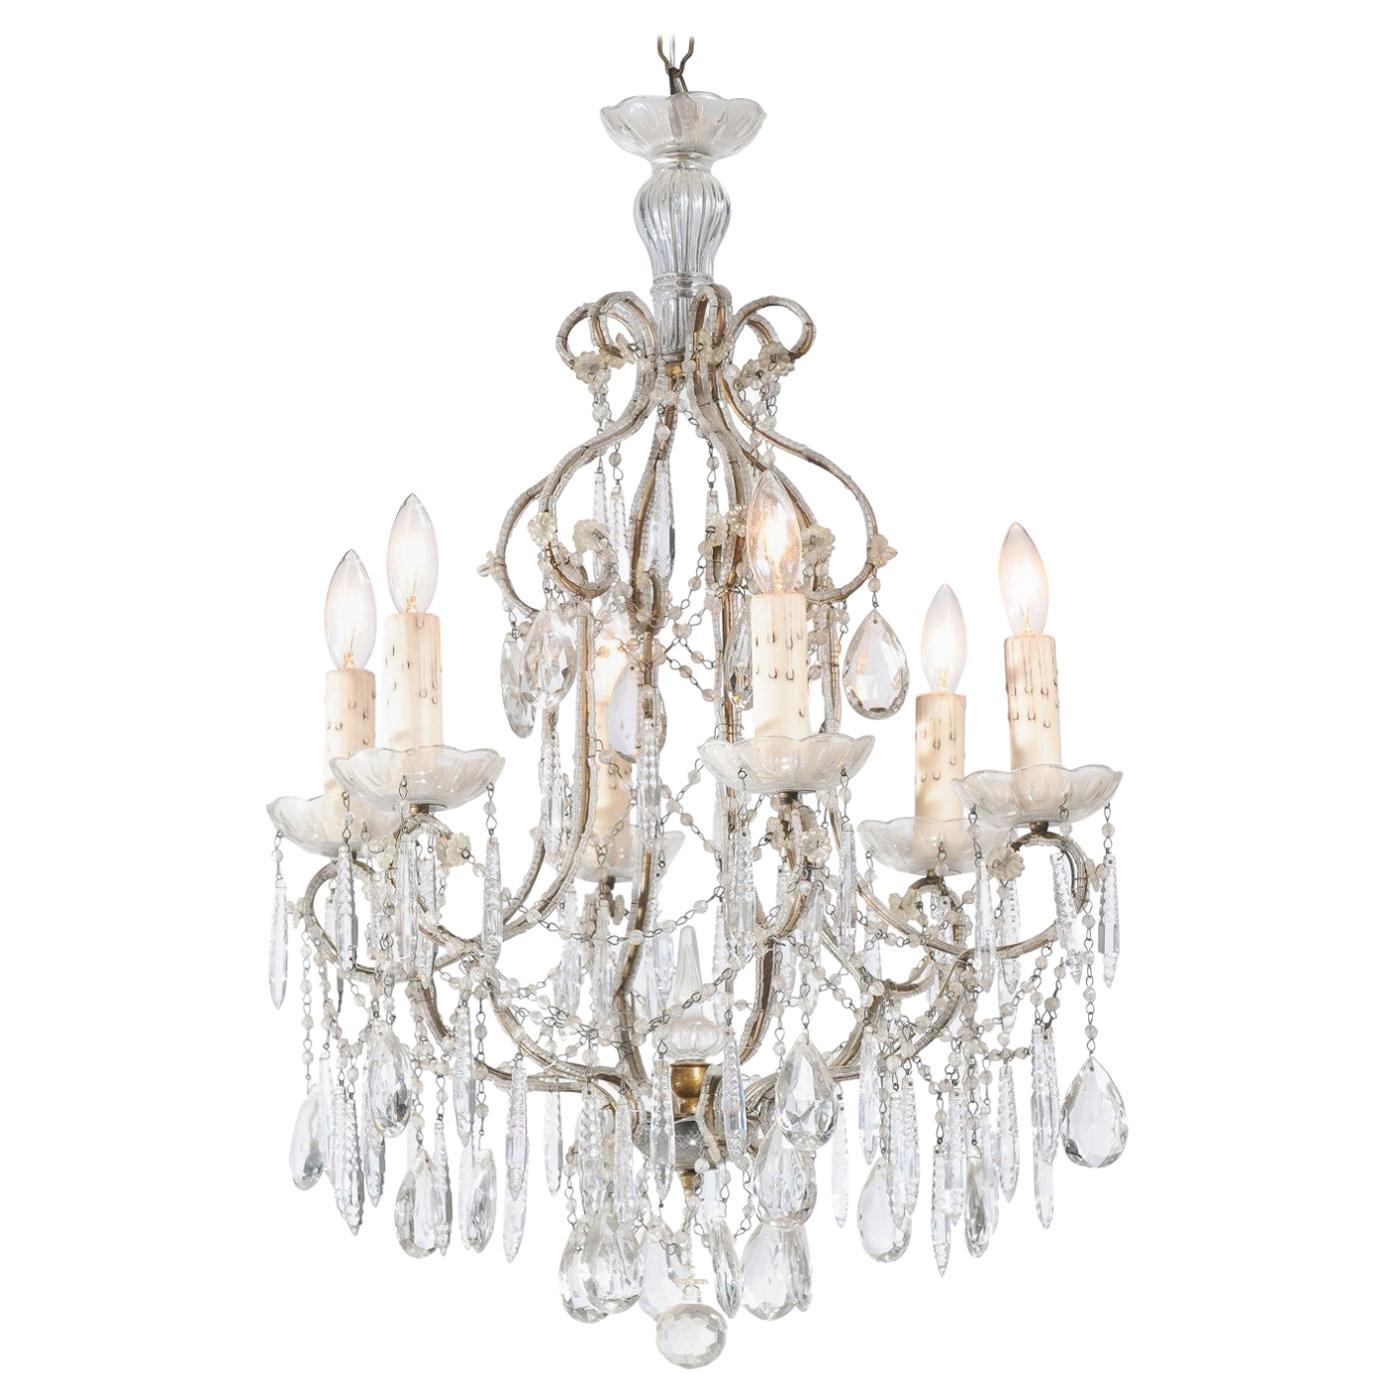 Italian 19th Century Six-Light Chandelier with Beaded Arms and Spear Crystals For Sale